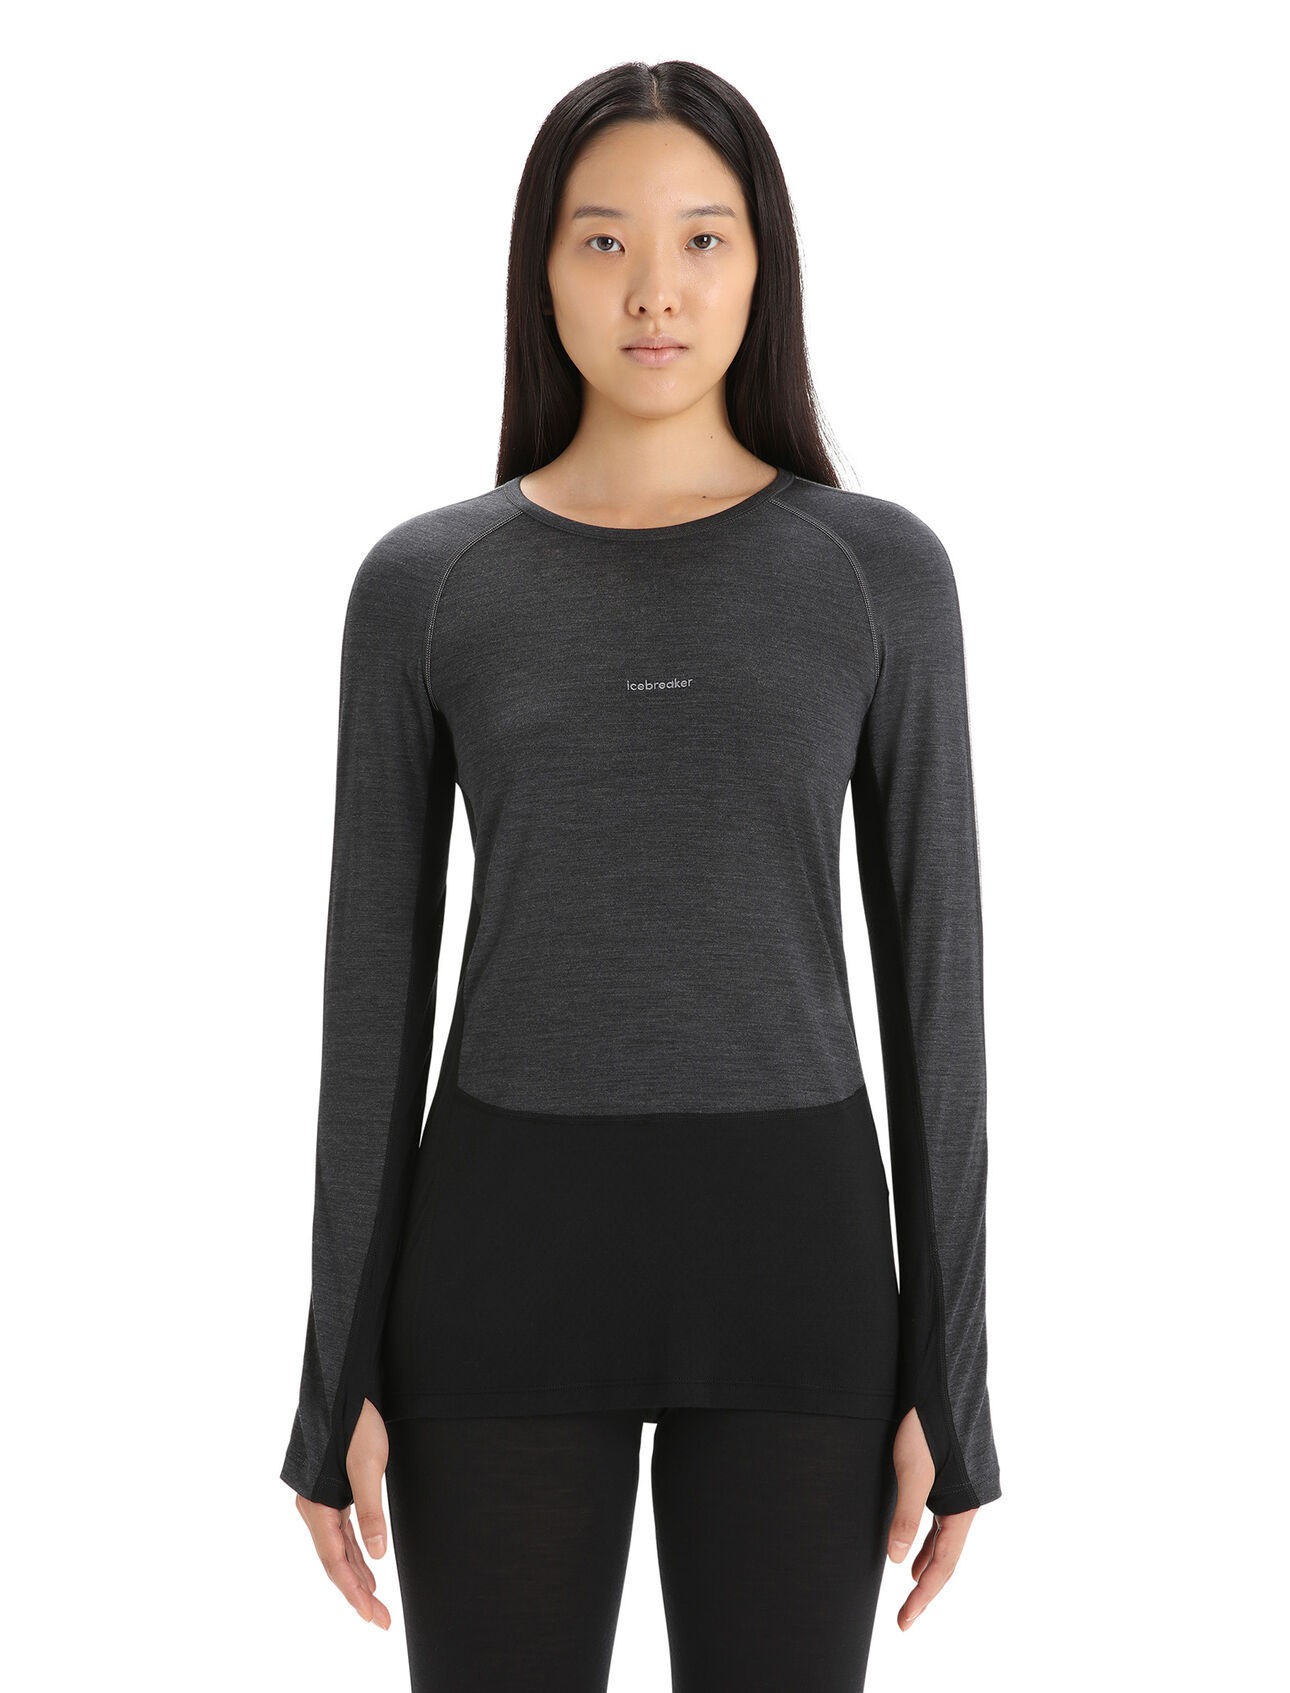 Womens 125 ZoneKnit™ Merino Long Sleeve Crewe Thermal Top An ultralight merino base layer top designed to help regulate body temperature during high-intensity activity, the 125 ZoneKnit™ Long Sleeve Crewe features our jersey Cool-Lite™ fabric for adventure and everyday training.